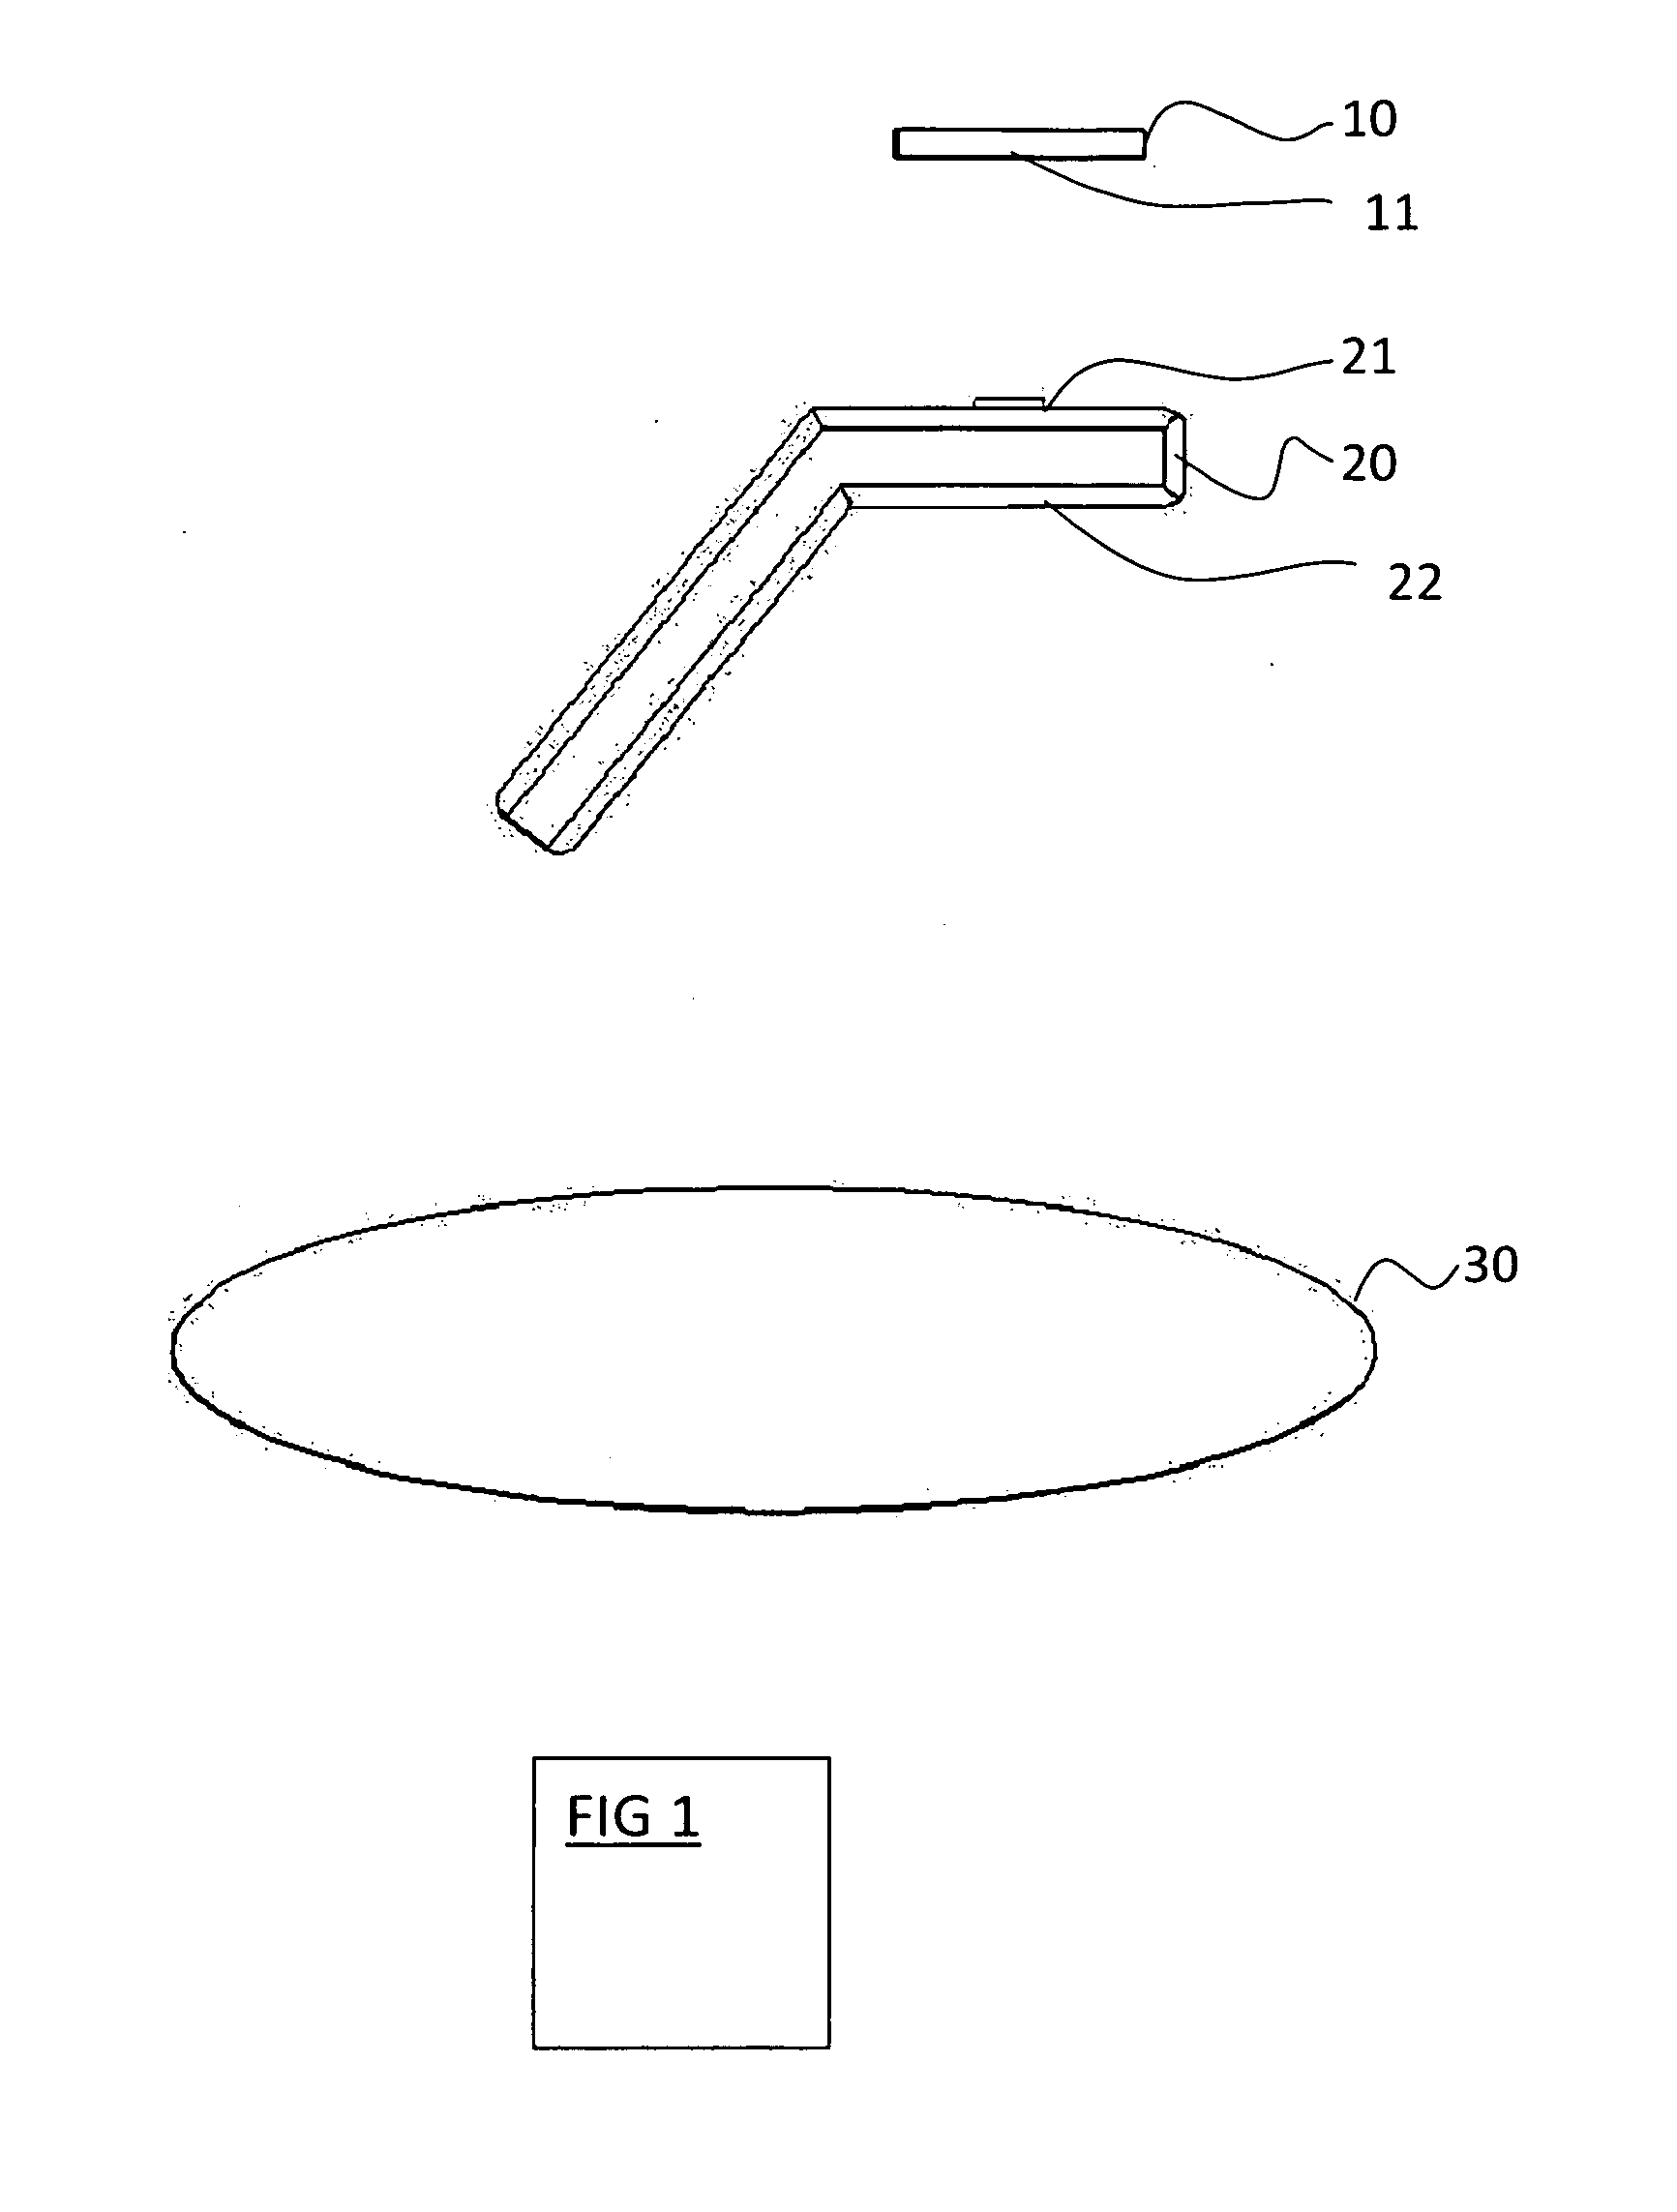 Method and apparatus for testing water quality using a cell-phone application, mirror and plastic bag